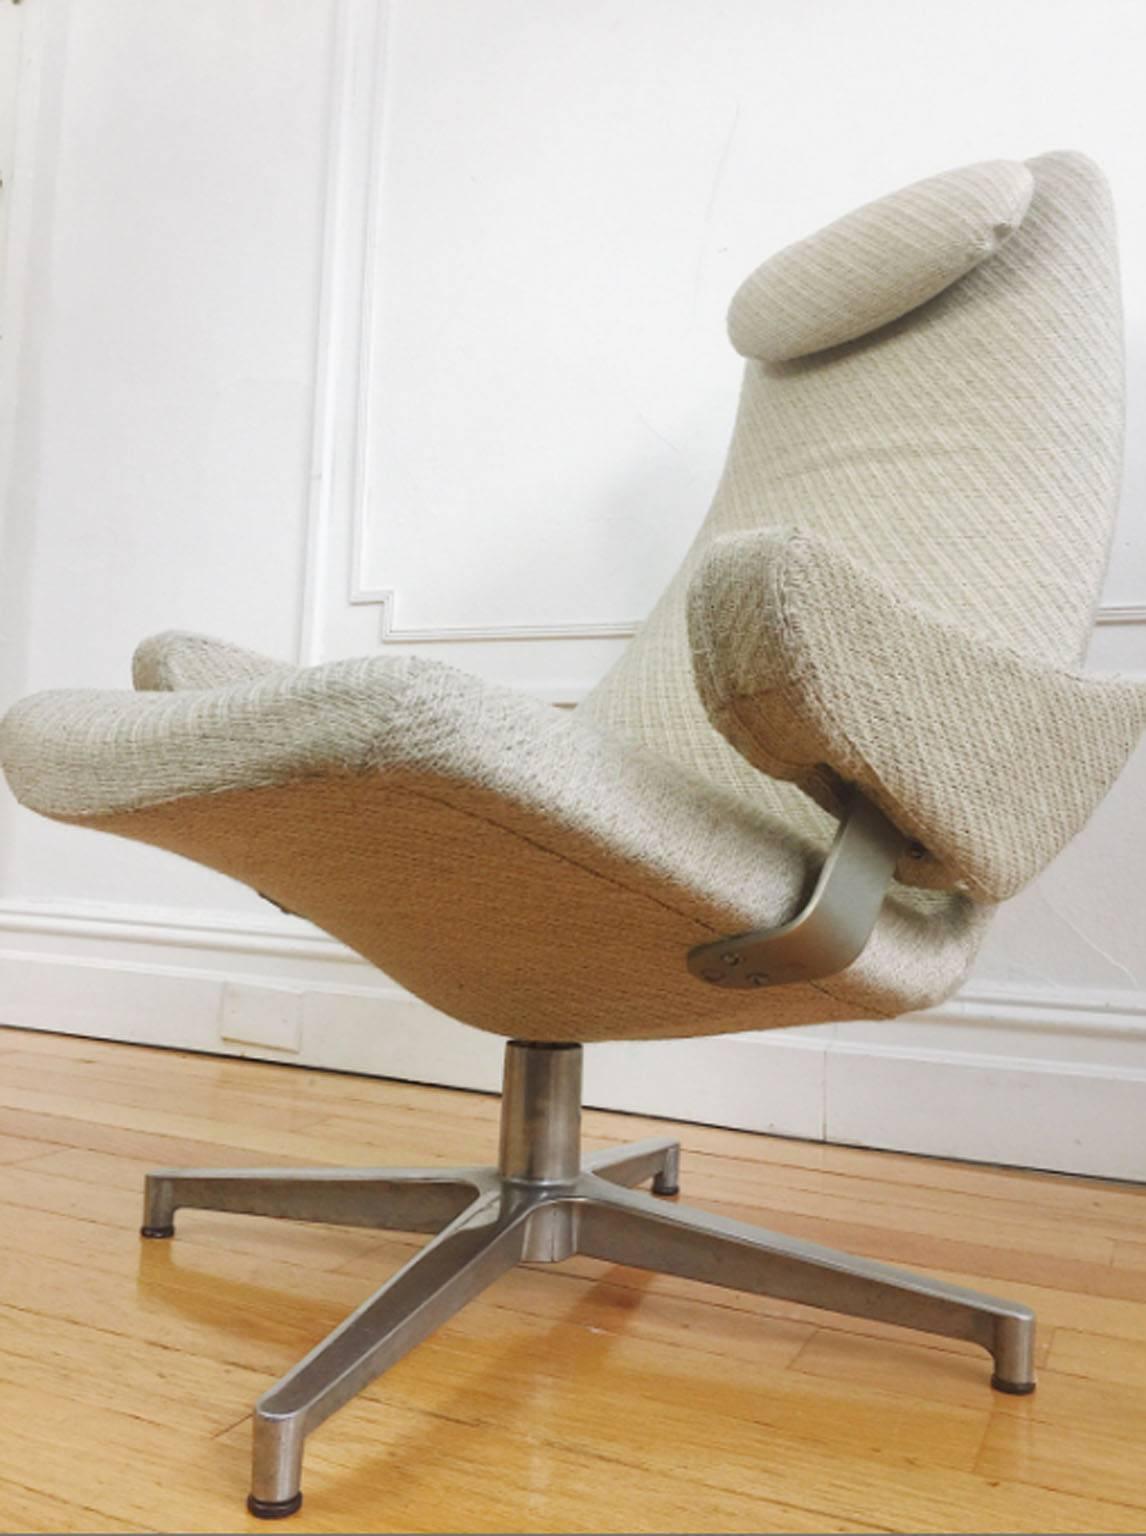 Mid-Century Modern DUX lounge chair by Alf Svensson. Slight recline, swivels 360 degrees, ergonomic design, head rest, heavy metal base and floating arm rests. Original fabric is in excellent vintage condition with some very light